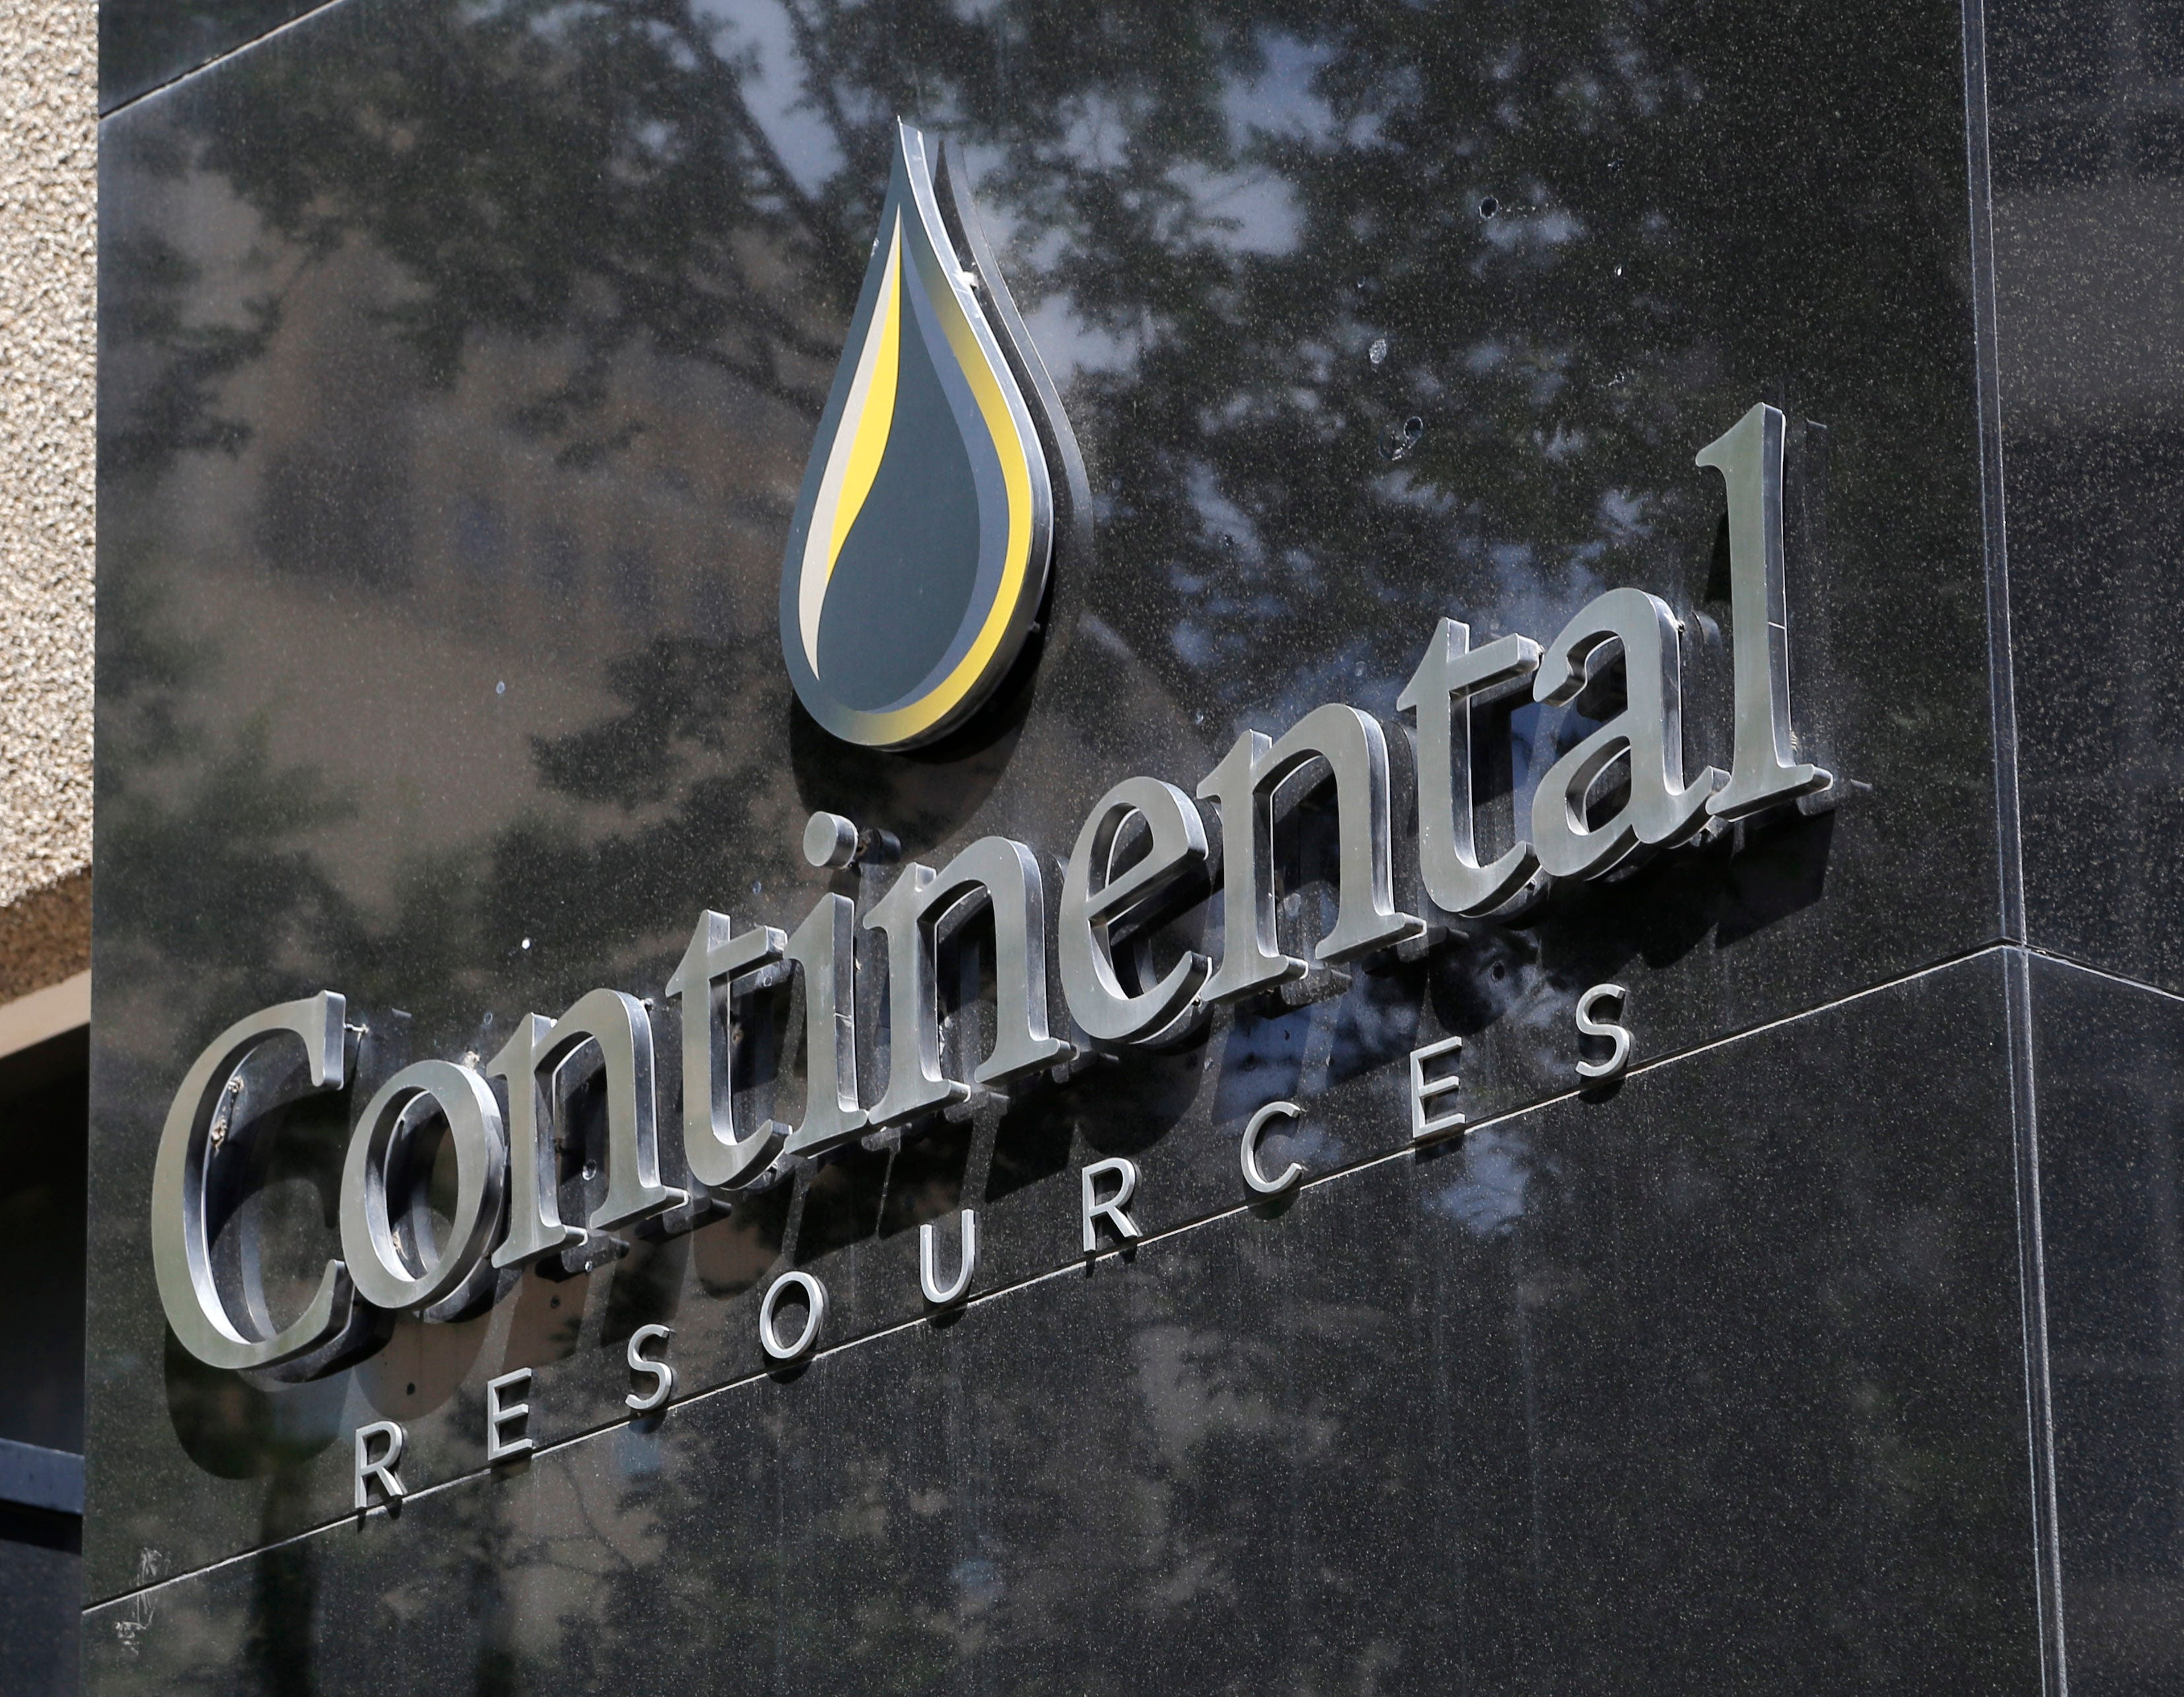 Continental Resources' office records inspection criticized by lawsuit